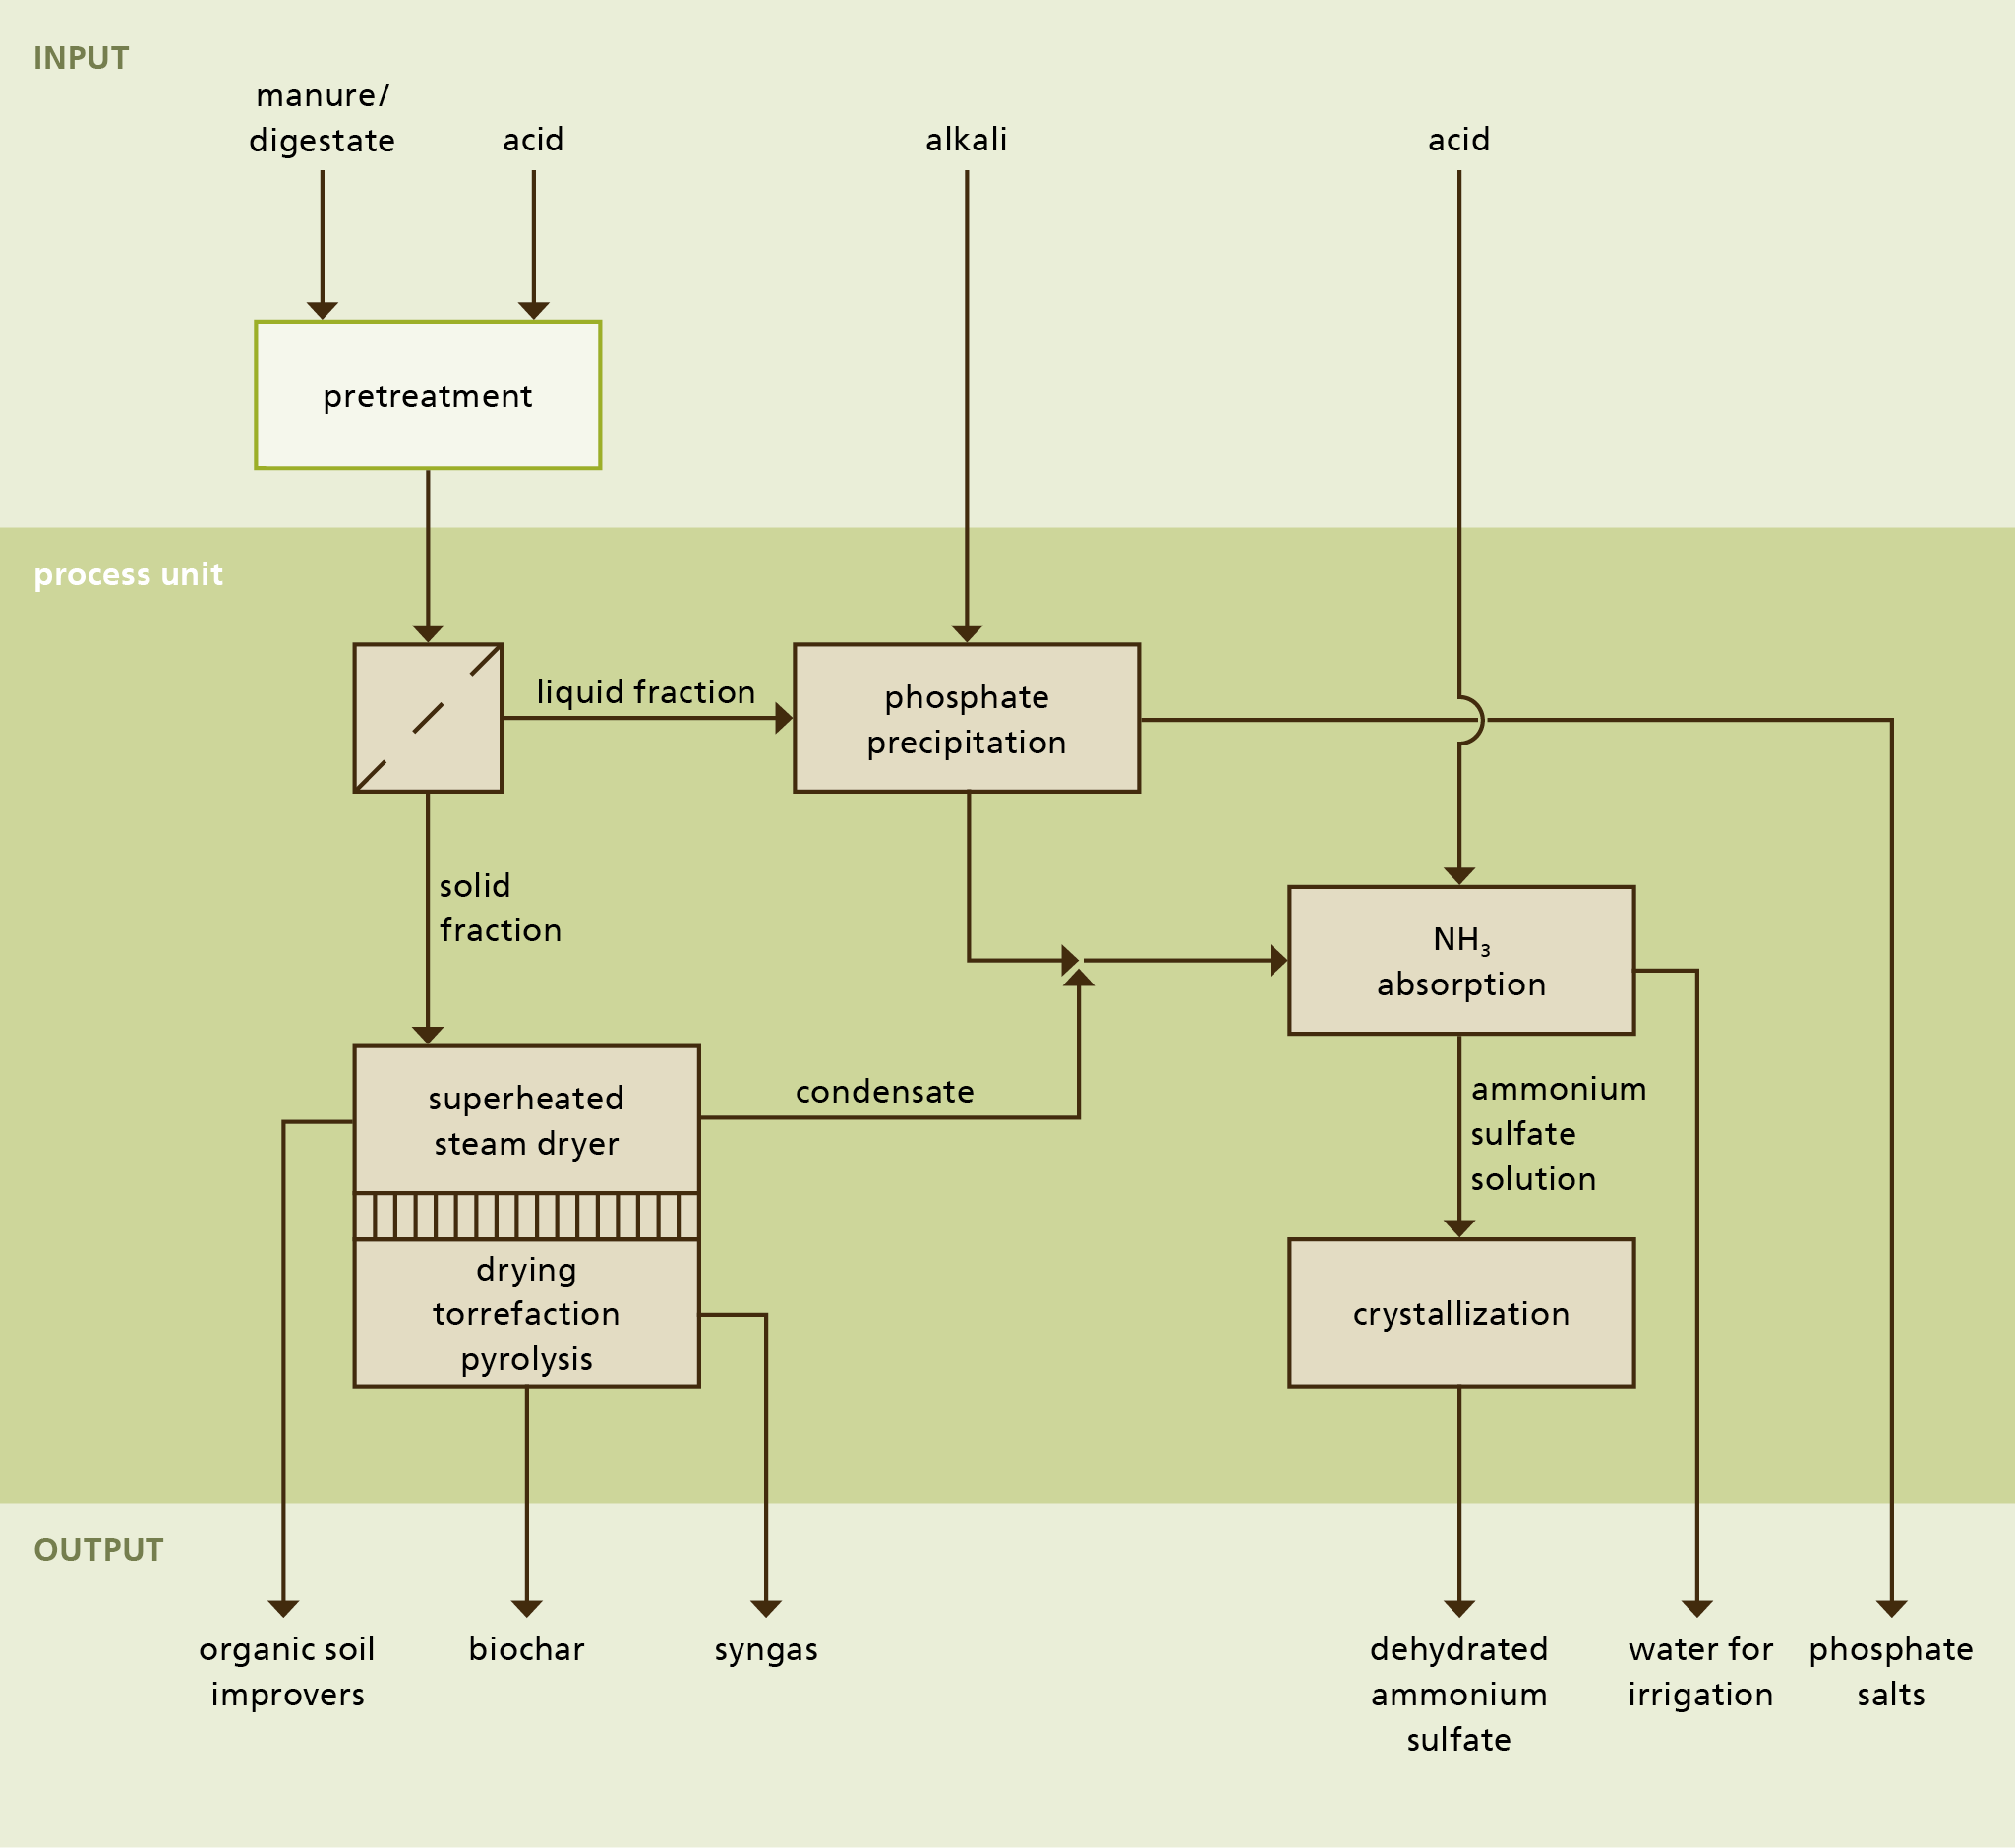 Flow chart of the process for processing liquid manure